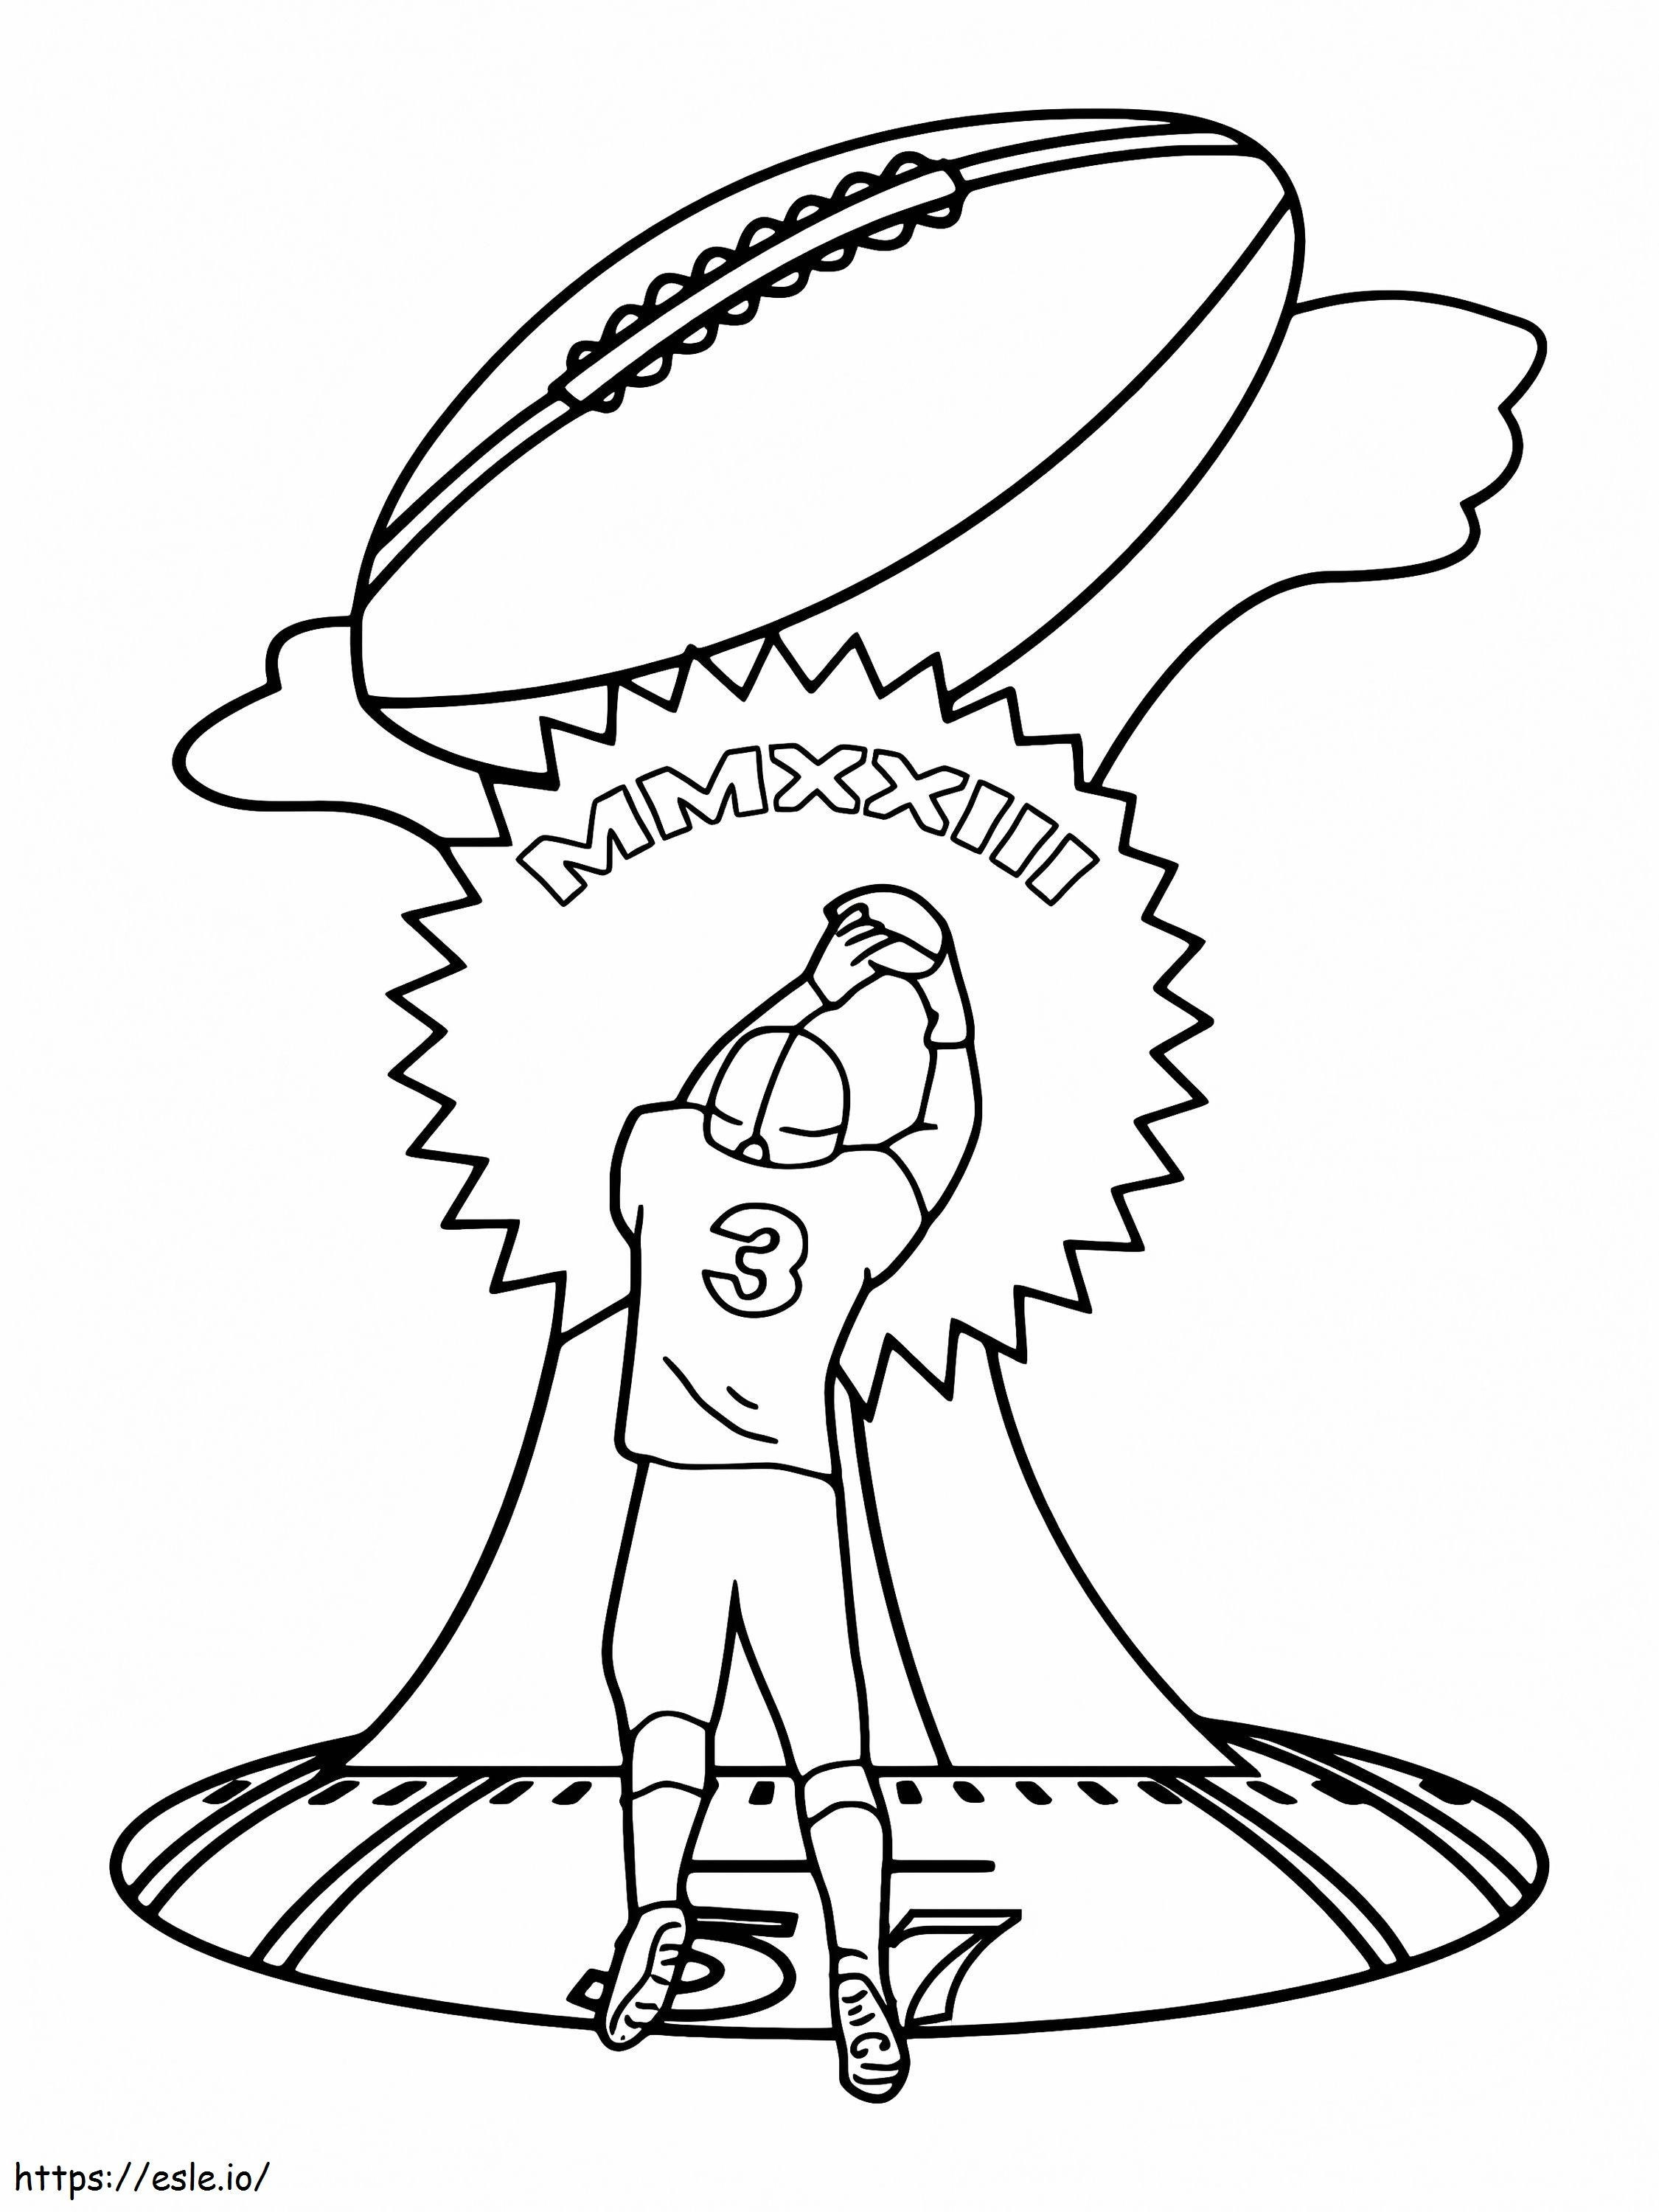 American Football Super Bowl Lvii coloring page